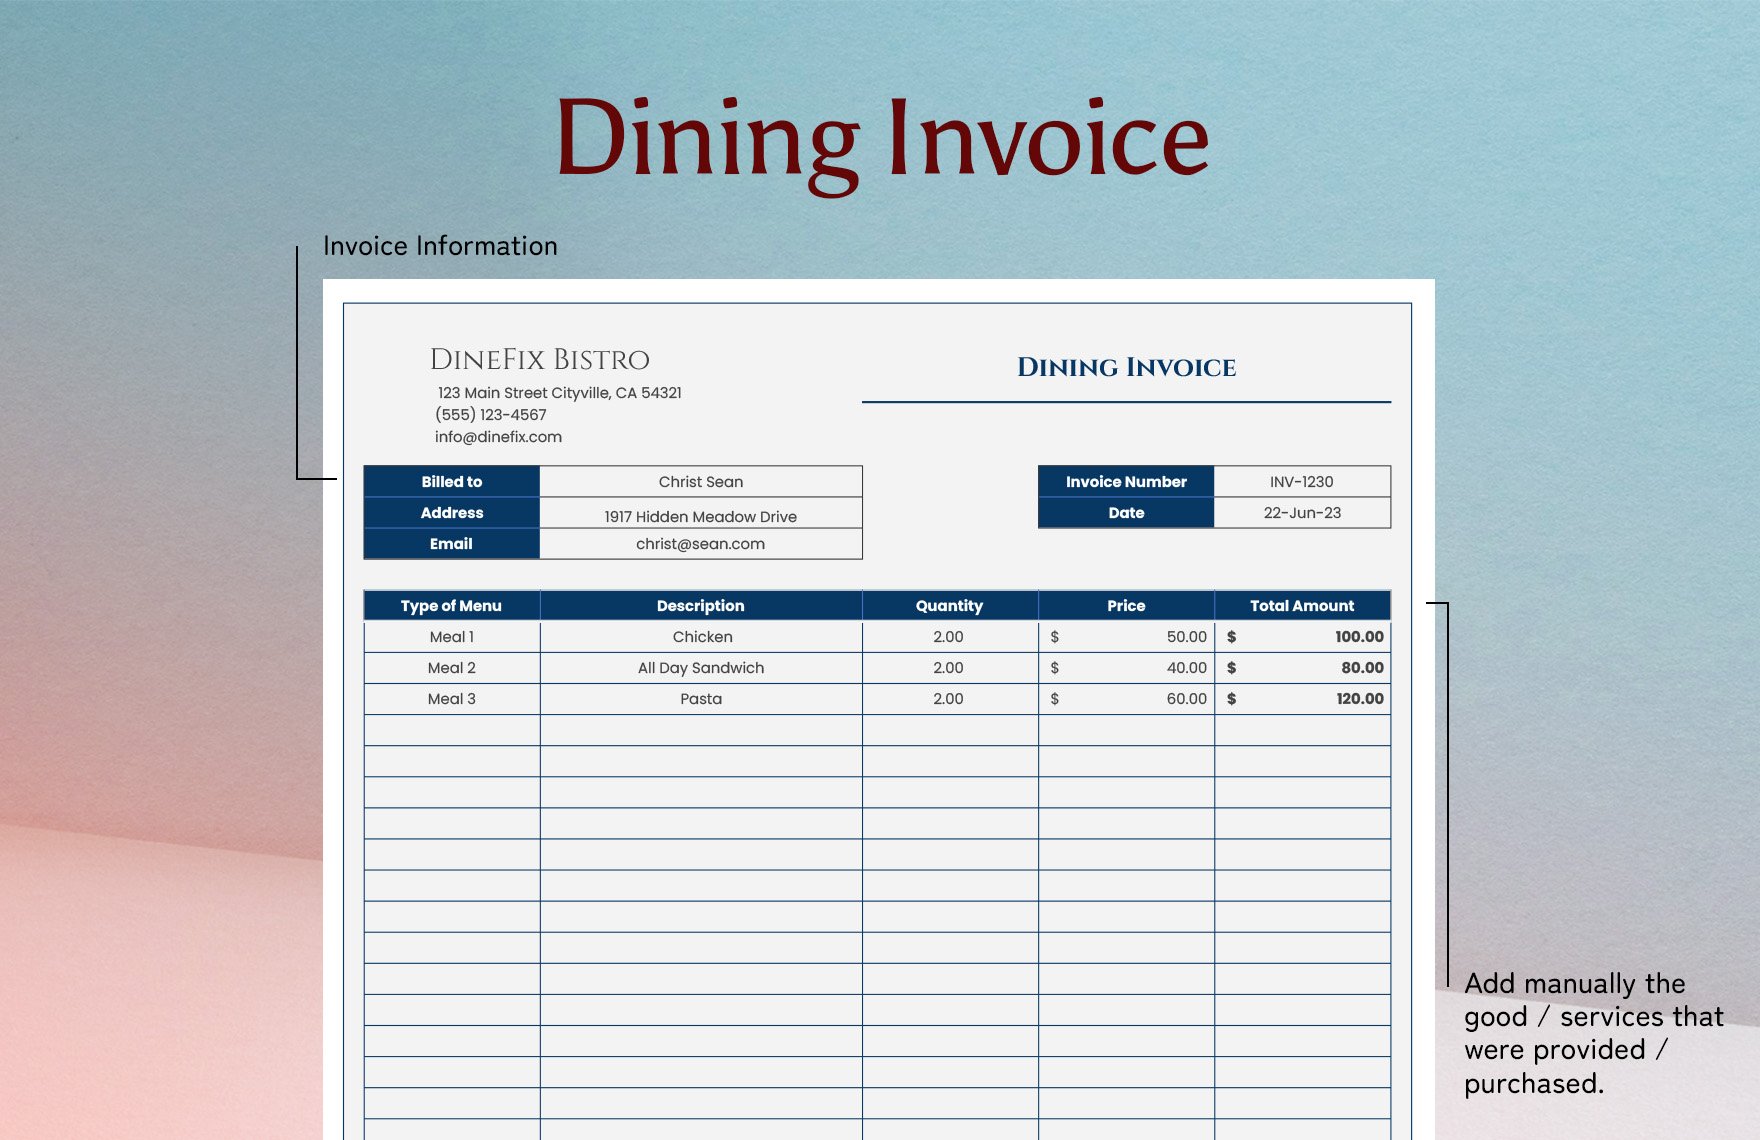 Dining Invoice Template